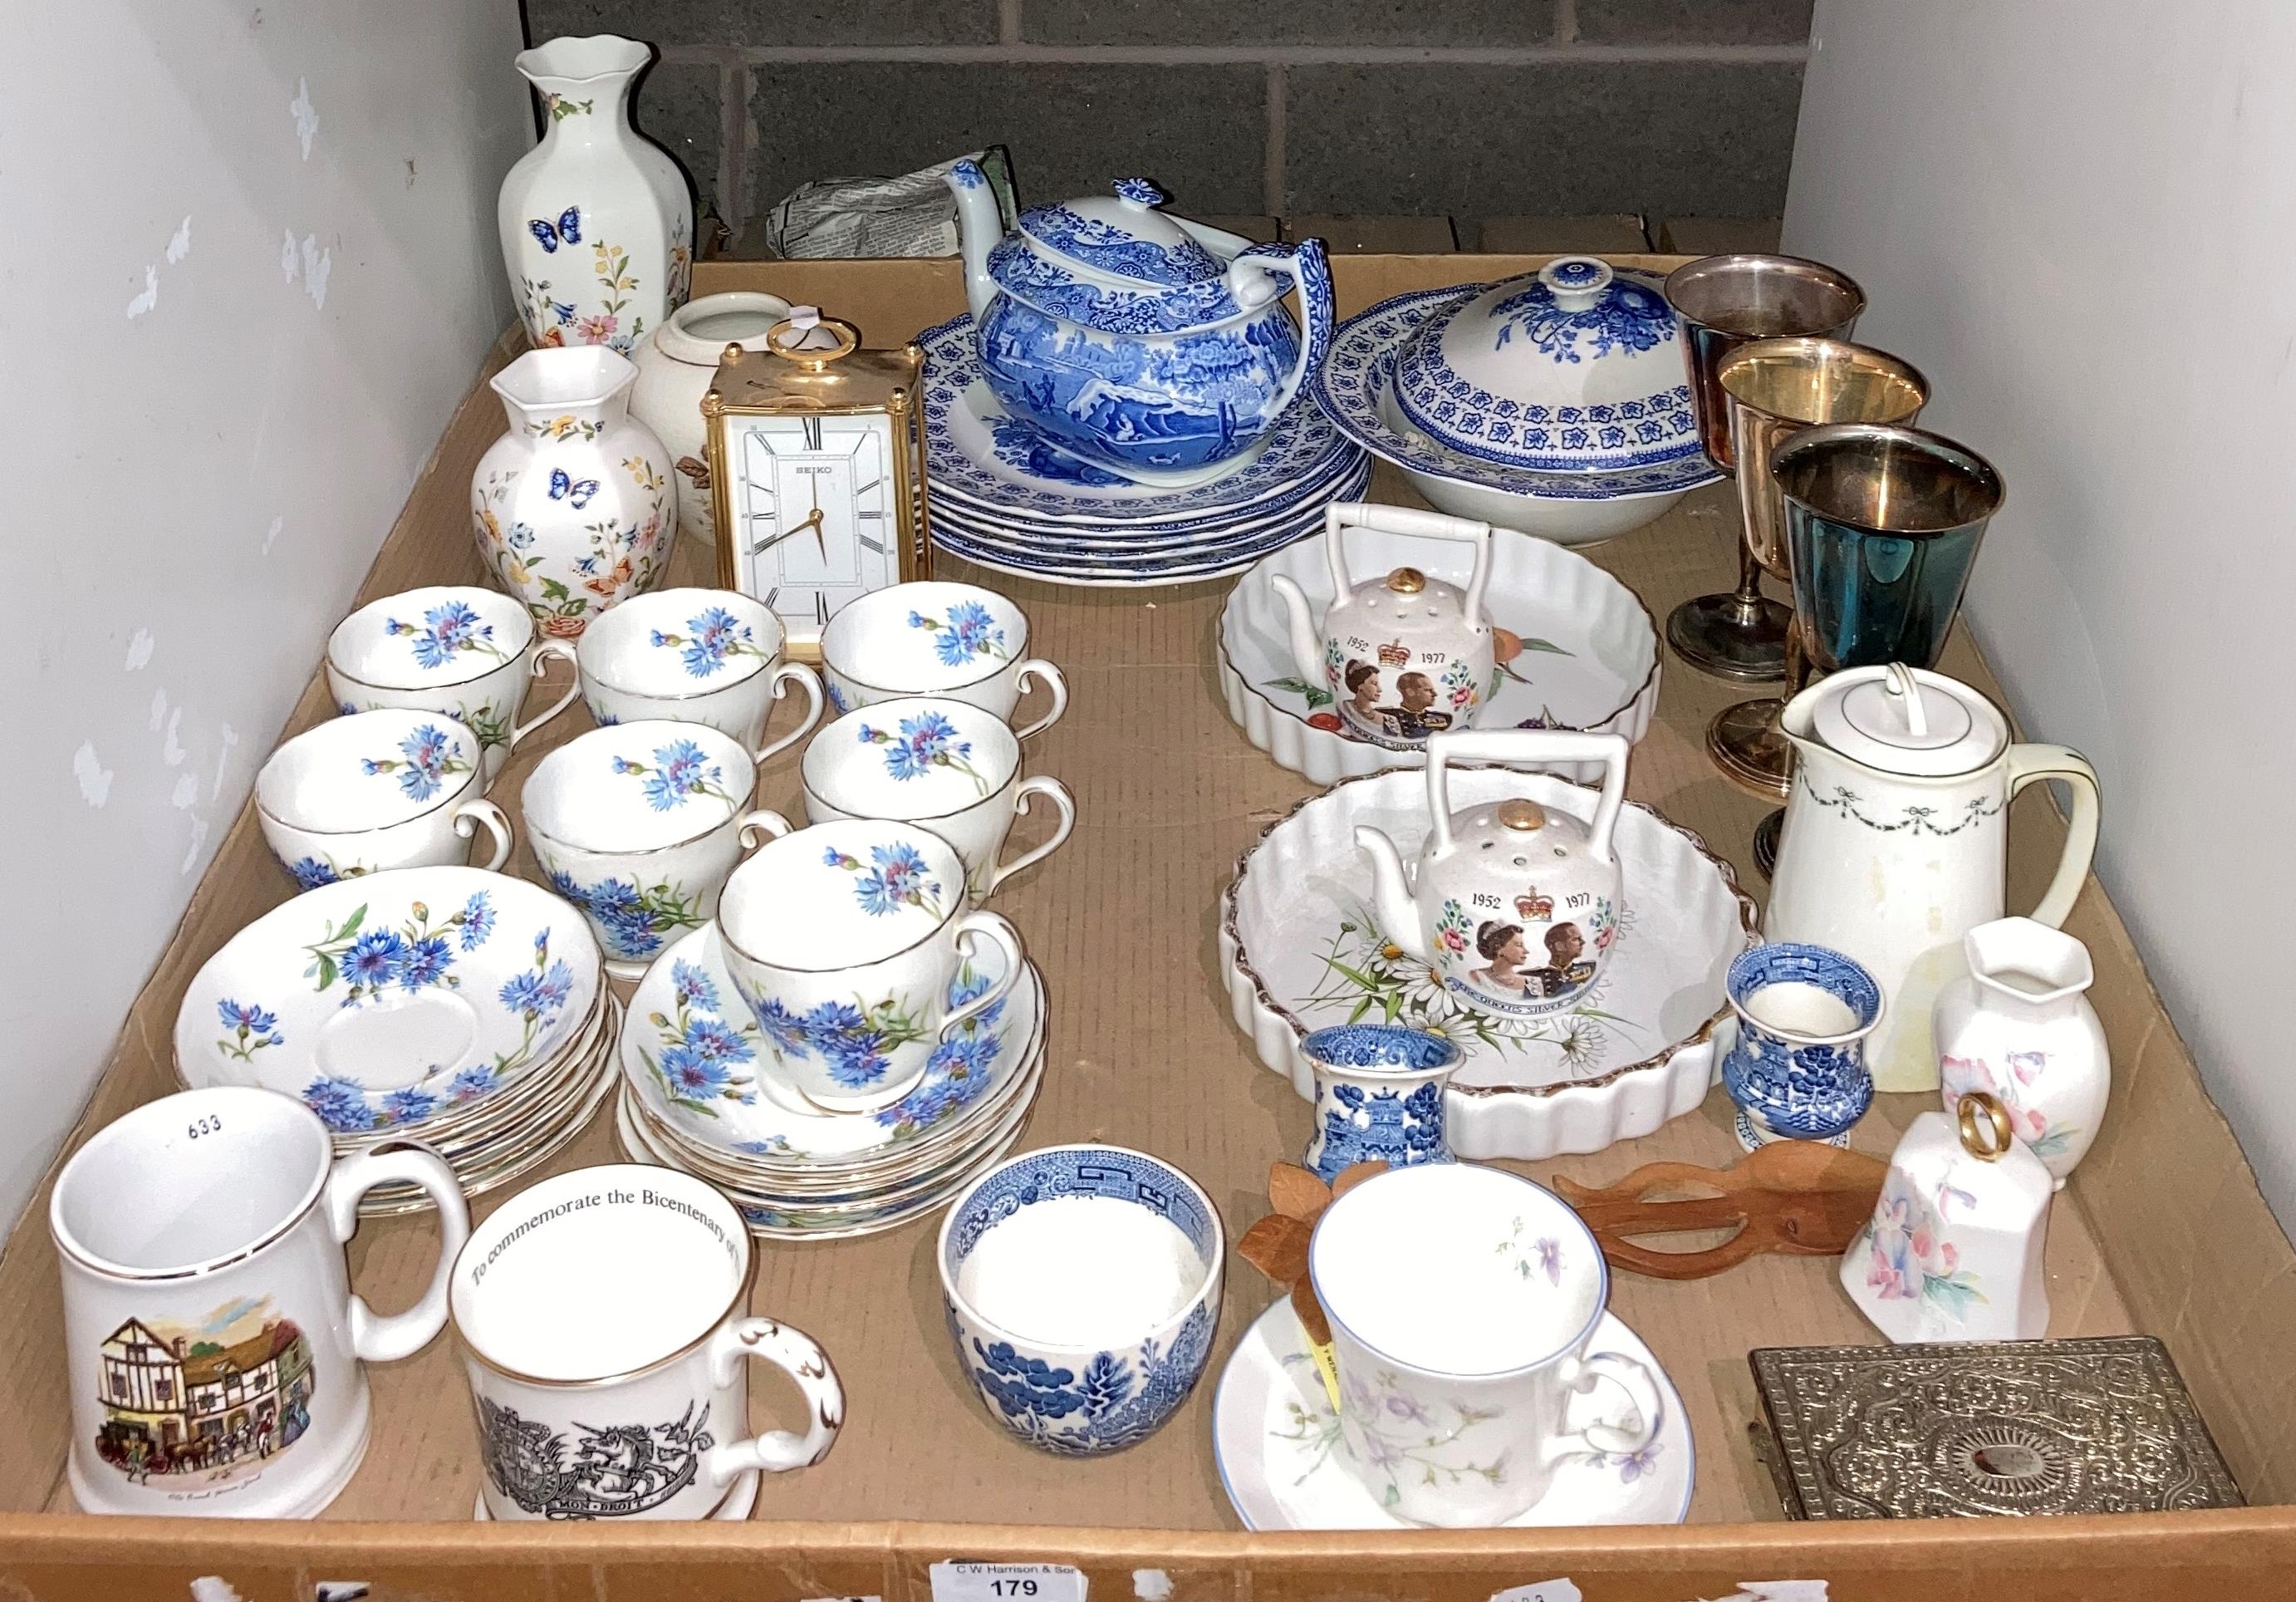 Contents to tray - 18-piece part tea service by Adderley, assorted ceramics by Aynsley, Copeland,